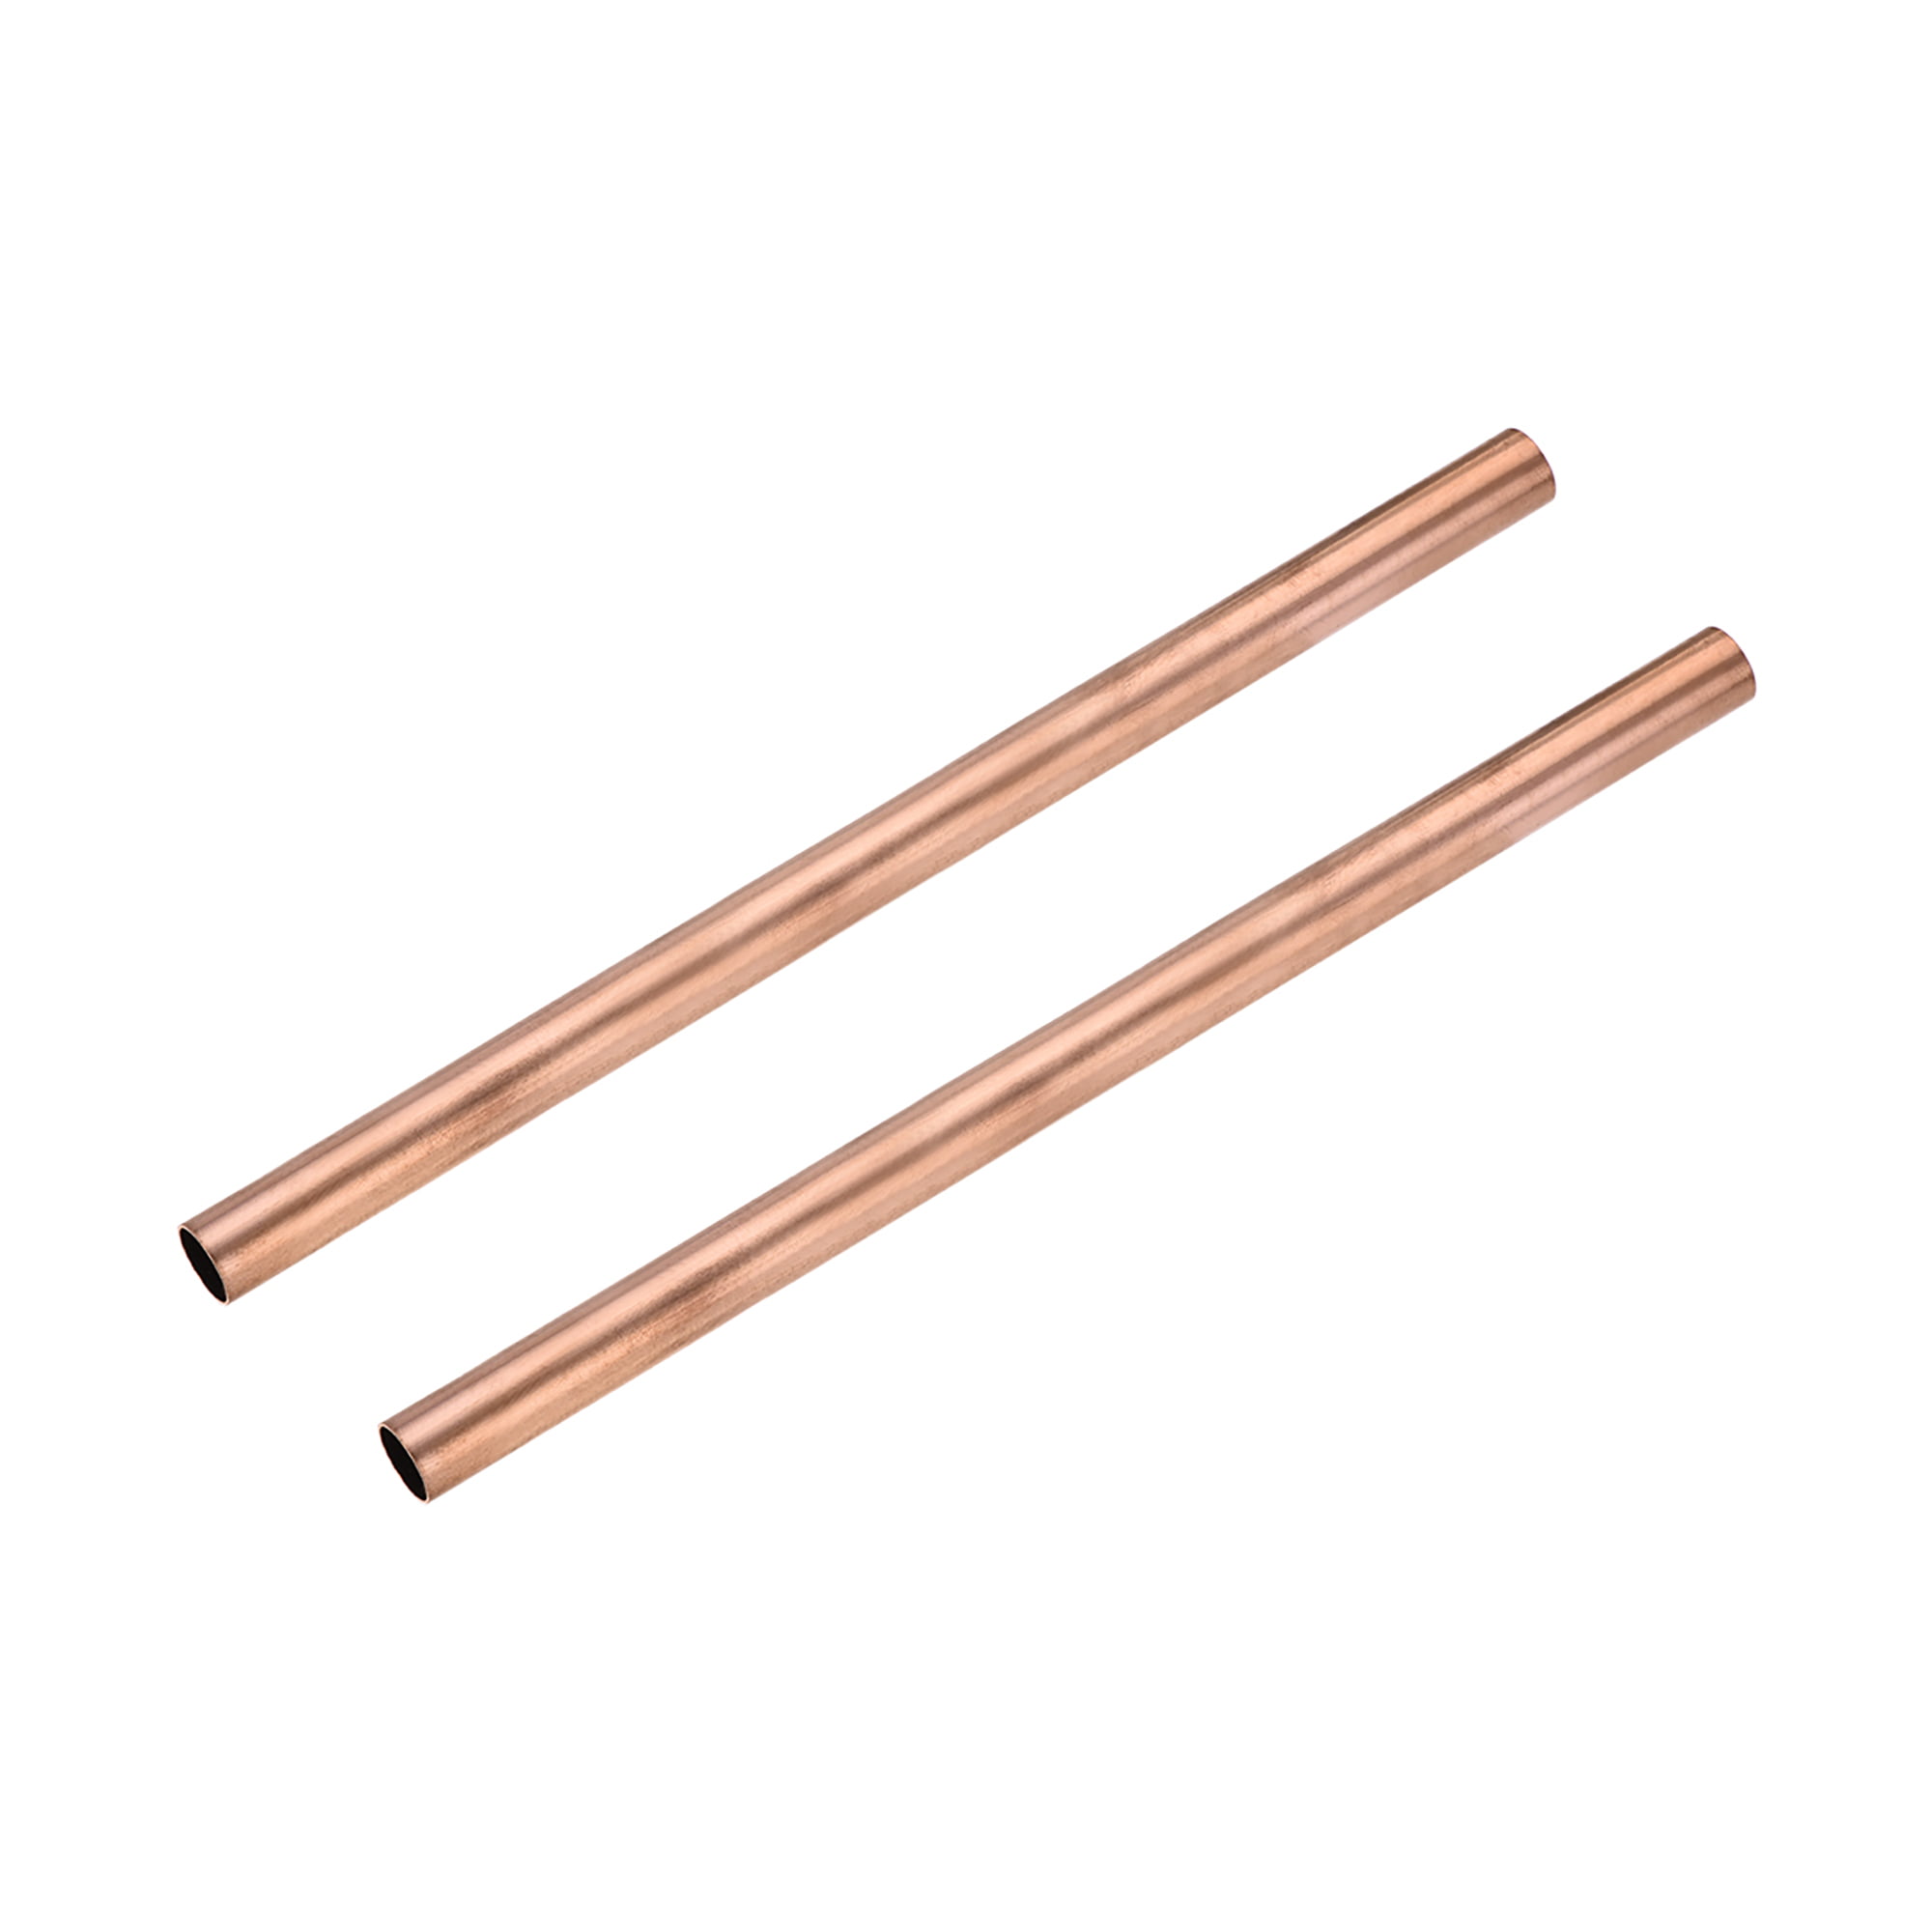 uxcell Copper Round Tube 7mm OD 0.2mm Wall Thickness 300mm Length Hollow Straight Pipe Tubing 2 Pcs 